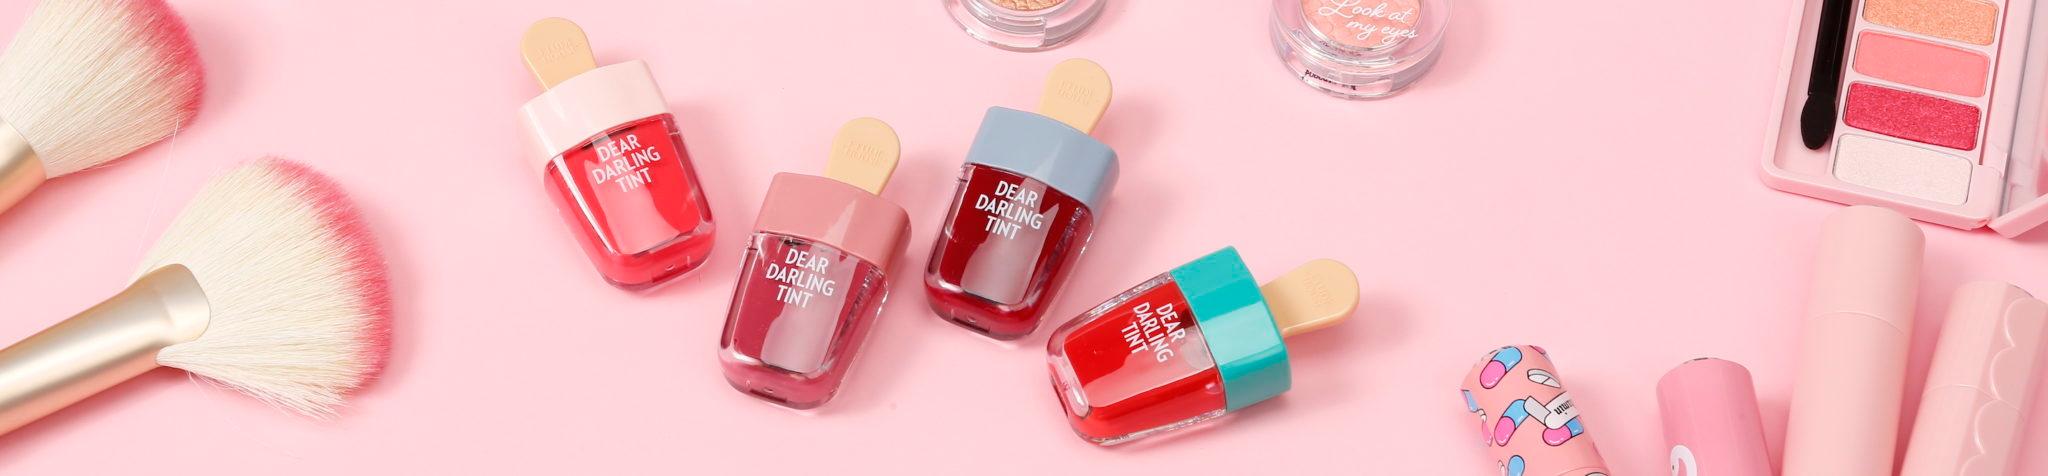 Get In a Summer Mood With These Etude House Must-Haves